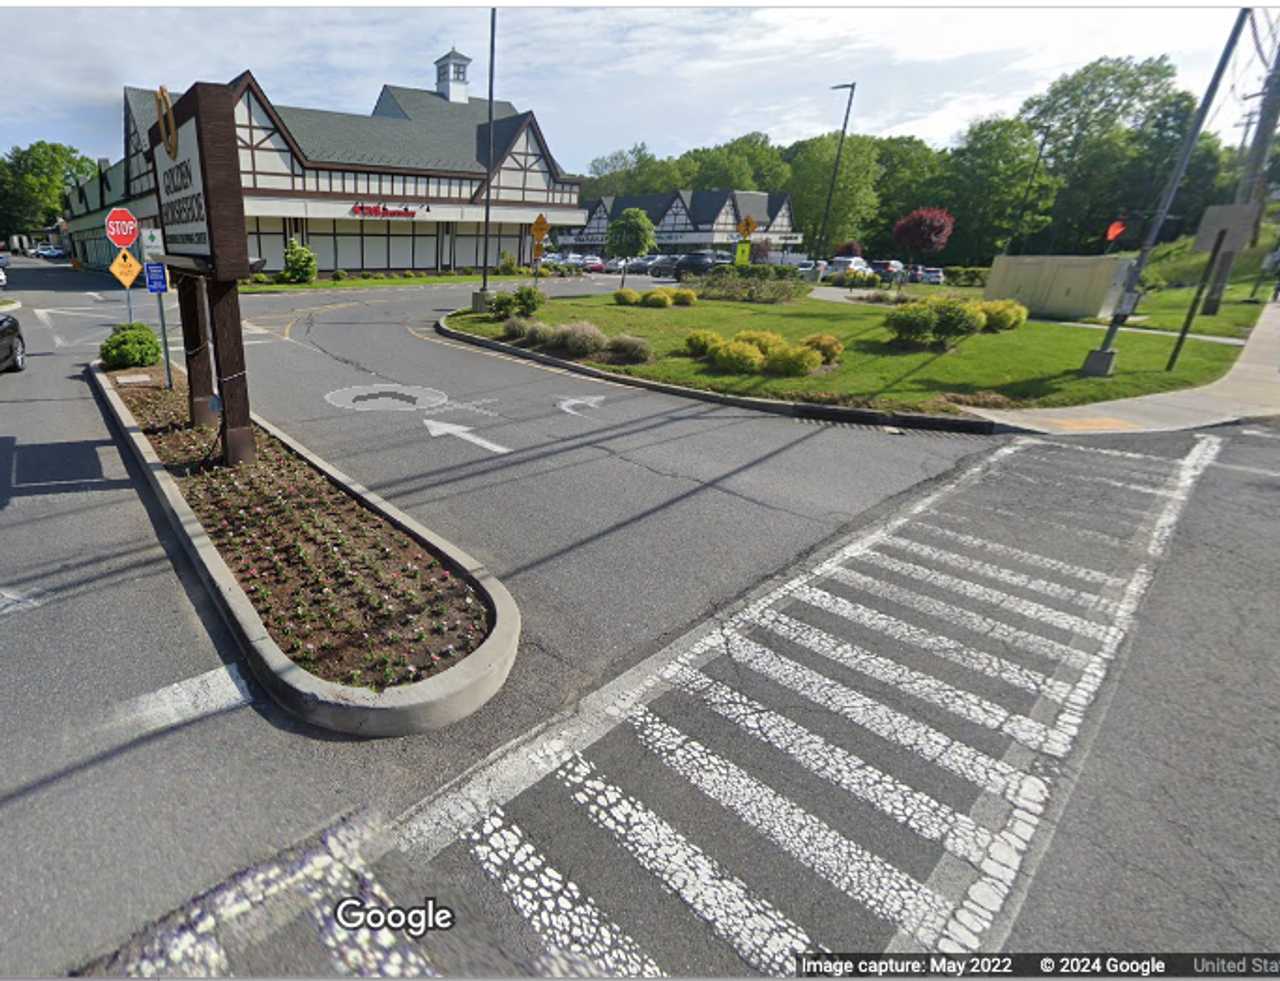 Person Found Dead Inside Burning Vehicle At Golden Horseshoe Shopping Center In New Rochelle